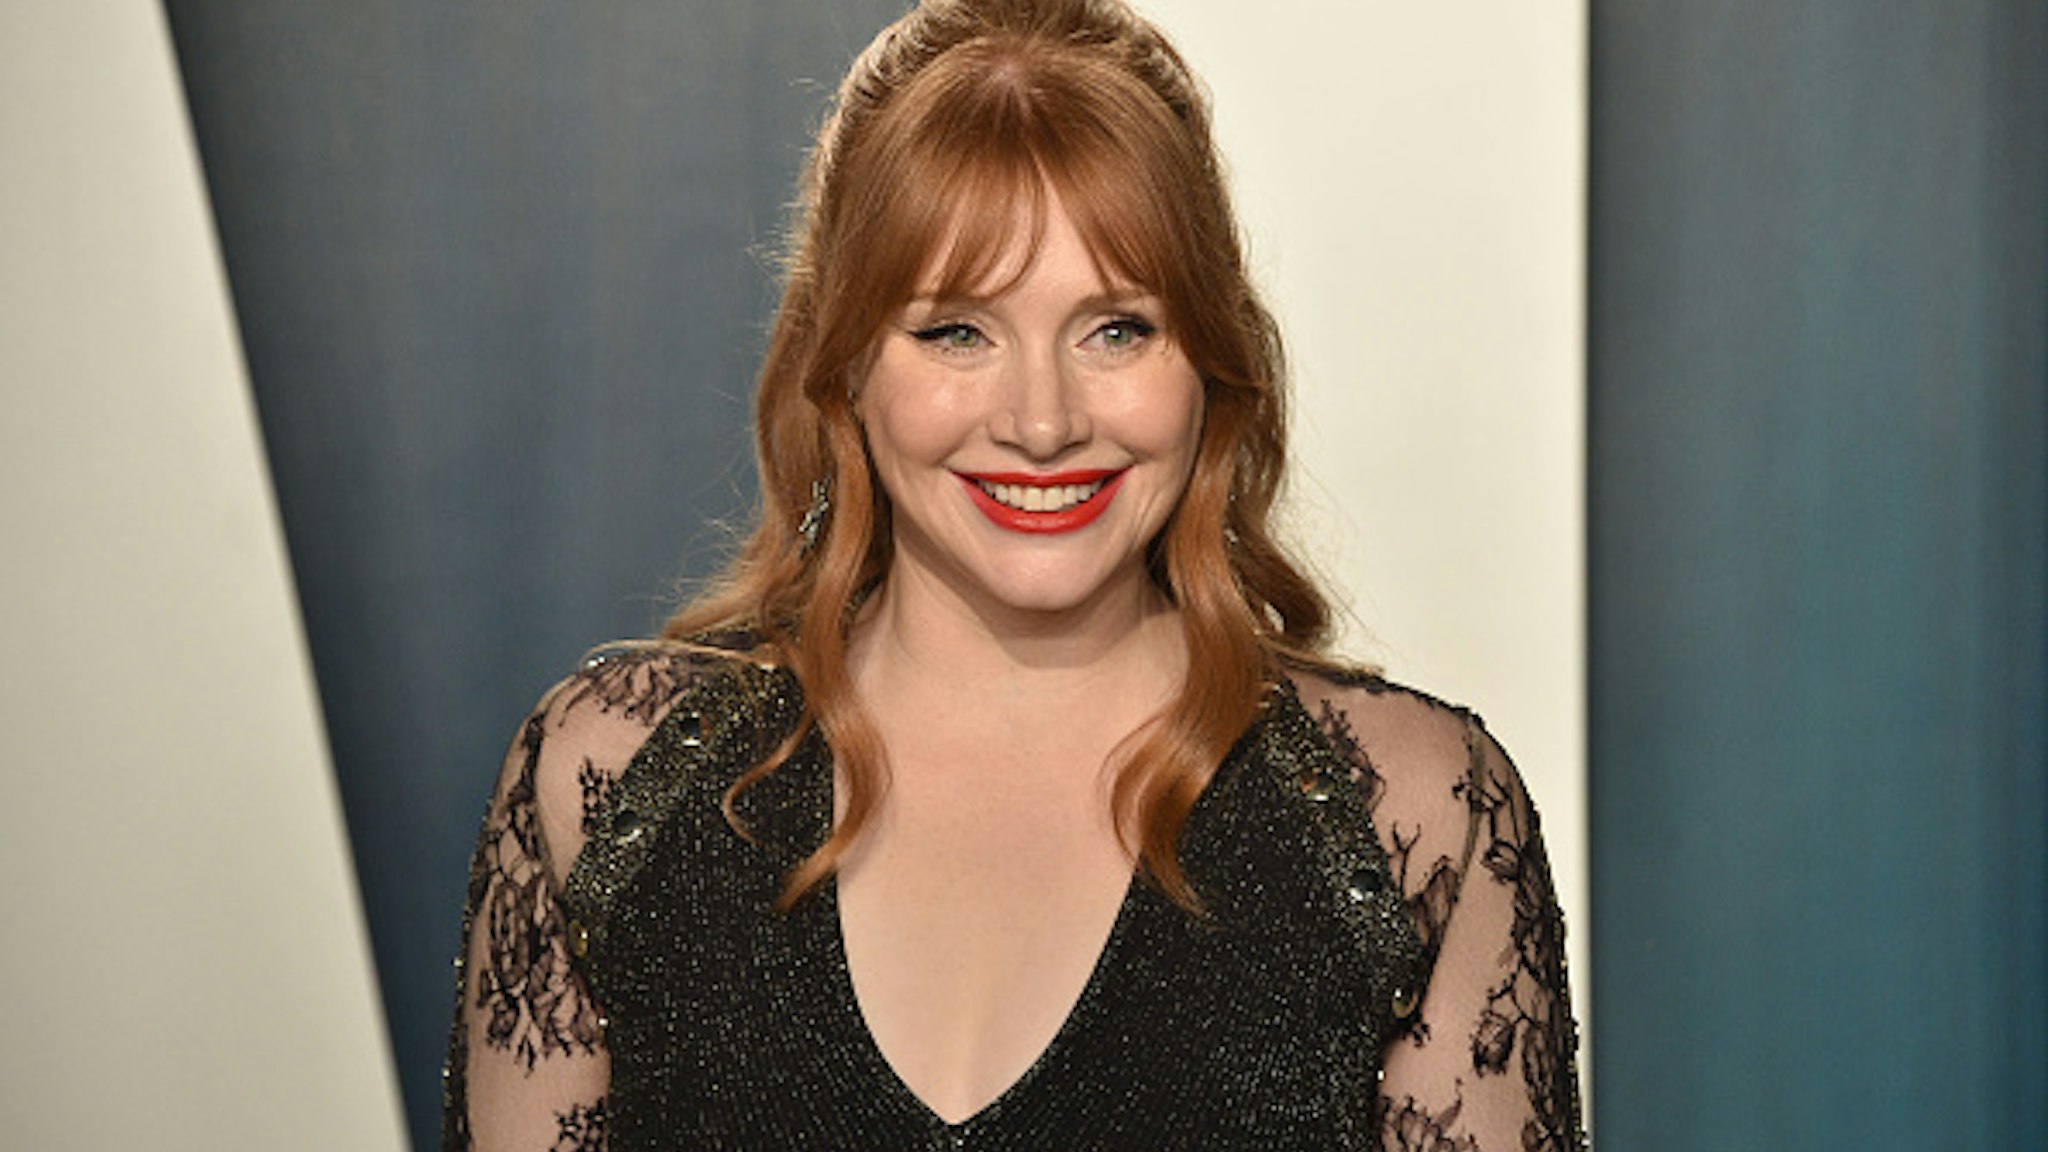 BEVERLY HILLS, CALIFORNIA - FEBRUARY 09: Bryce Dallas Howard attends the 2020 Vanity Fair Oscar Party at Wallis Annenberg Center for the Performing Arts on February 09, 2020 in Beverly Hills, California.